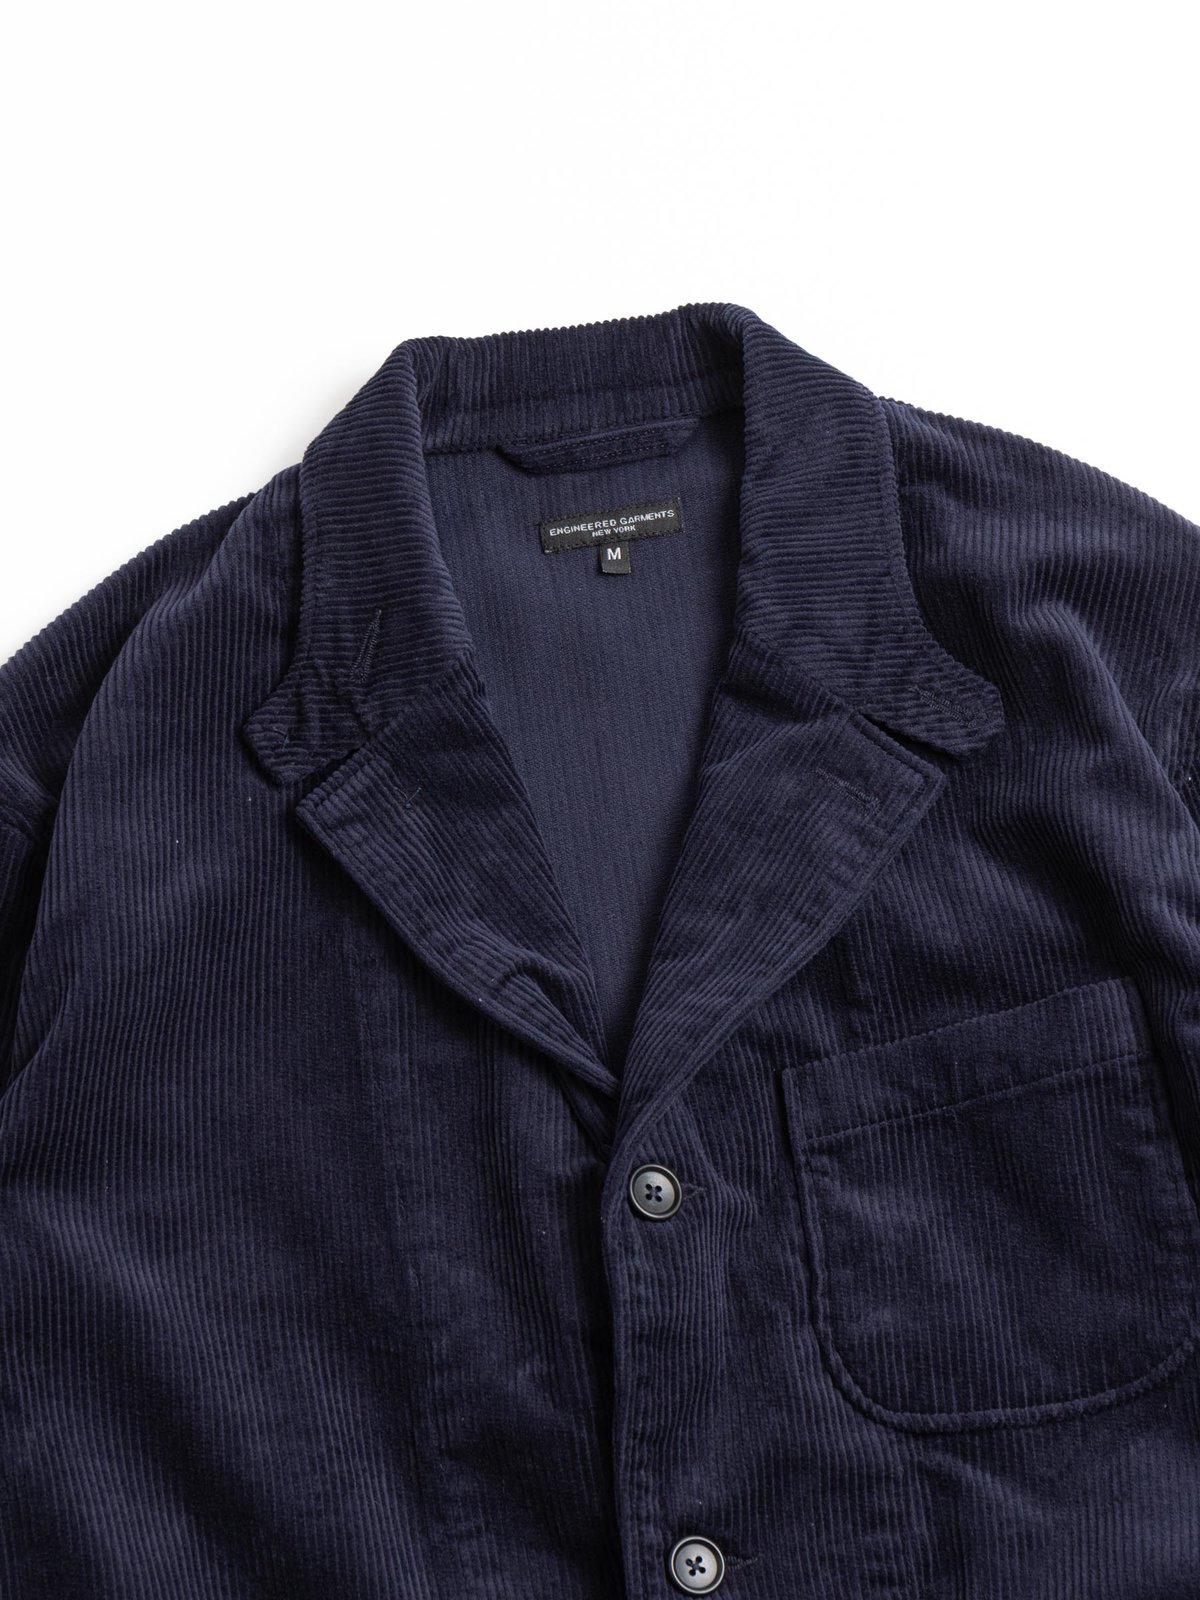 LOITER JACKET NAVY COTTON 8W CORDUROY by Engineered Garments – The